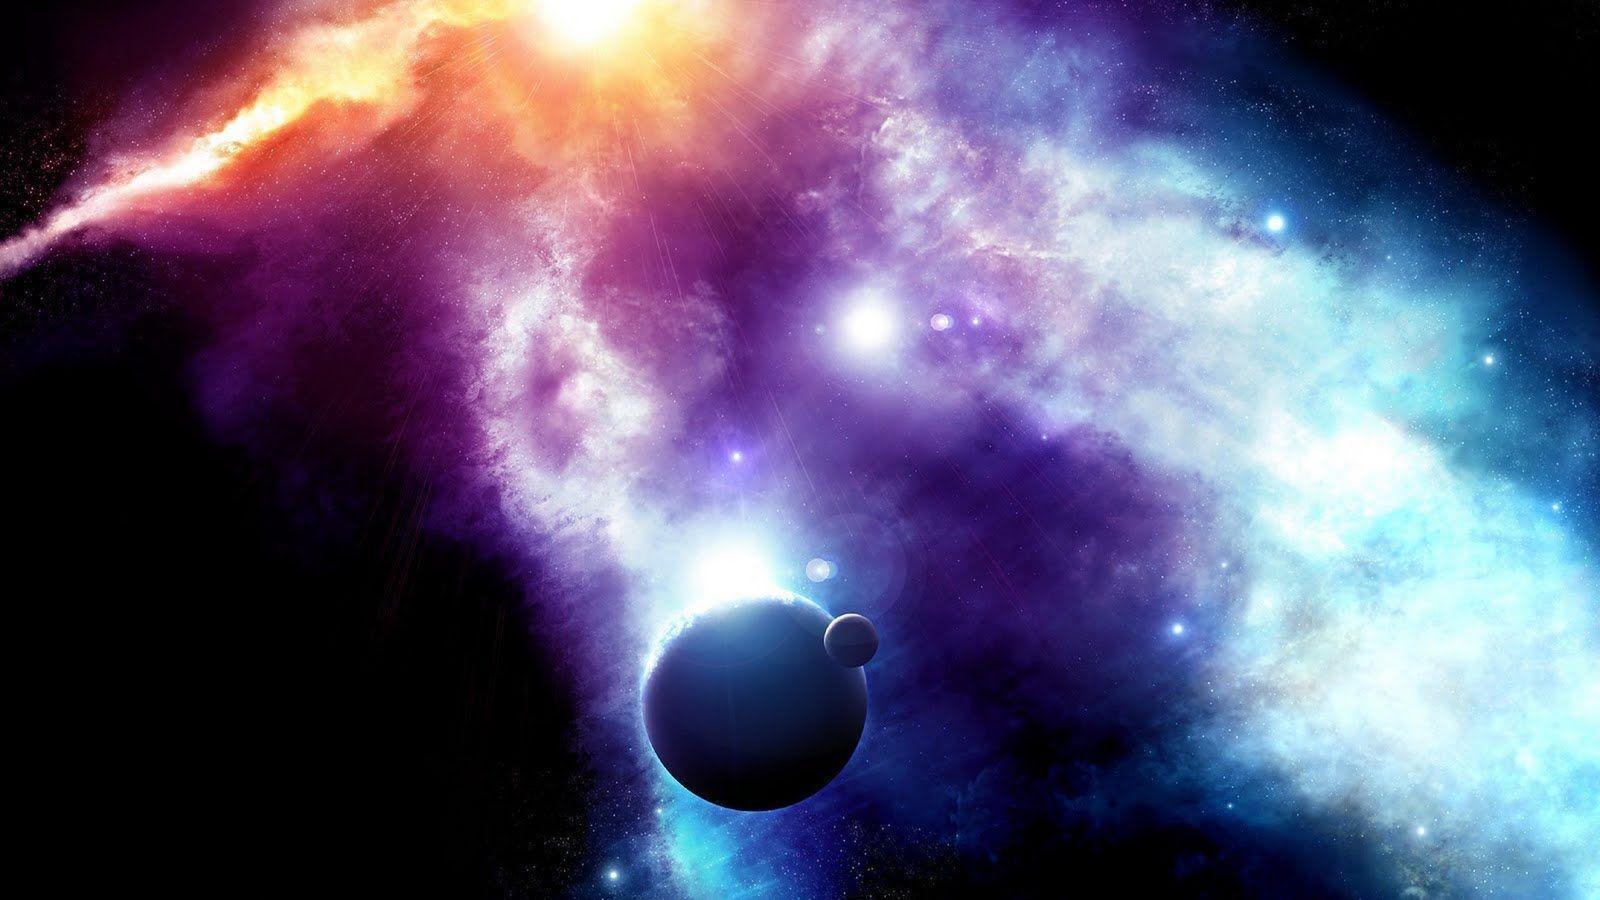 Hd Wallpapers Space Real Hd 1080P 11 HD Wallpapers